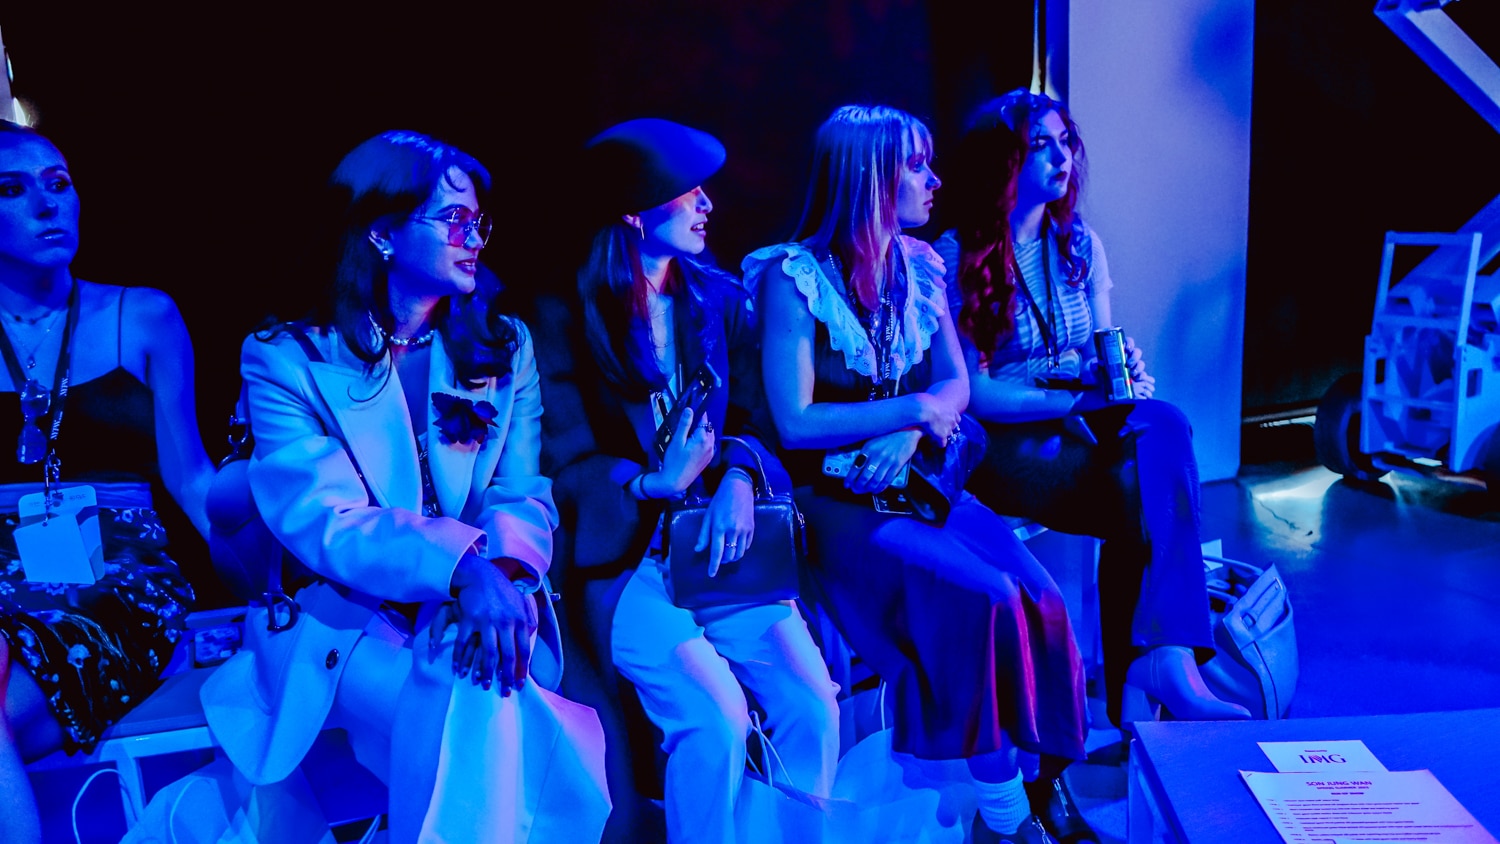 A group of women suffused in blue light at New York Fashion Week.